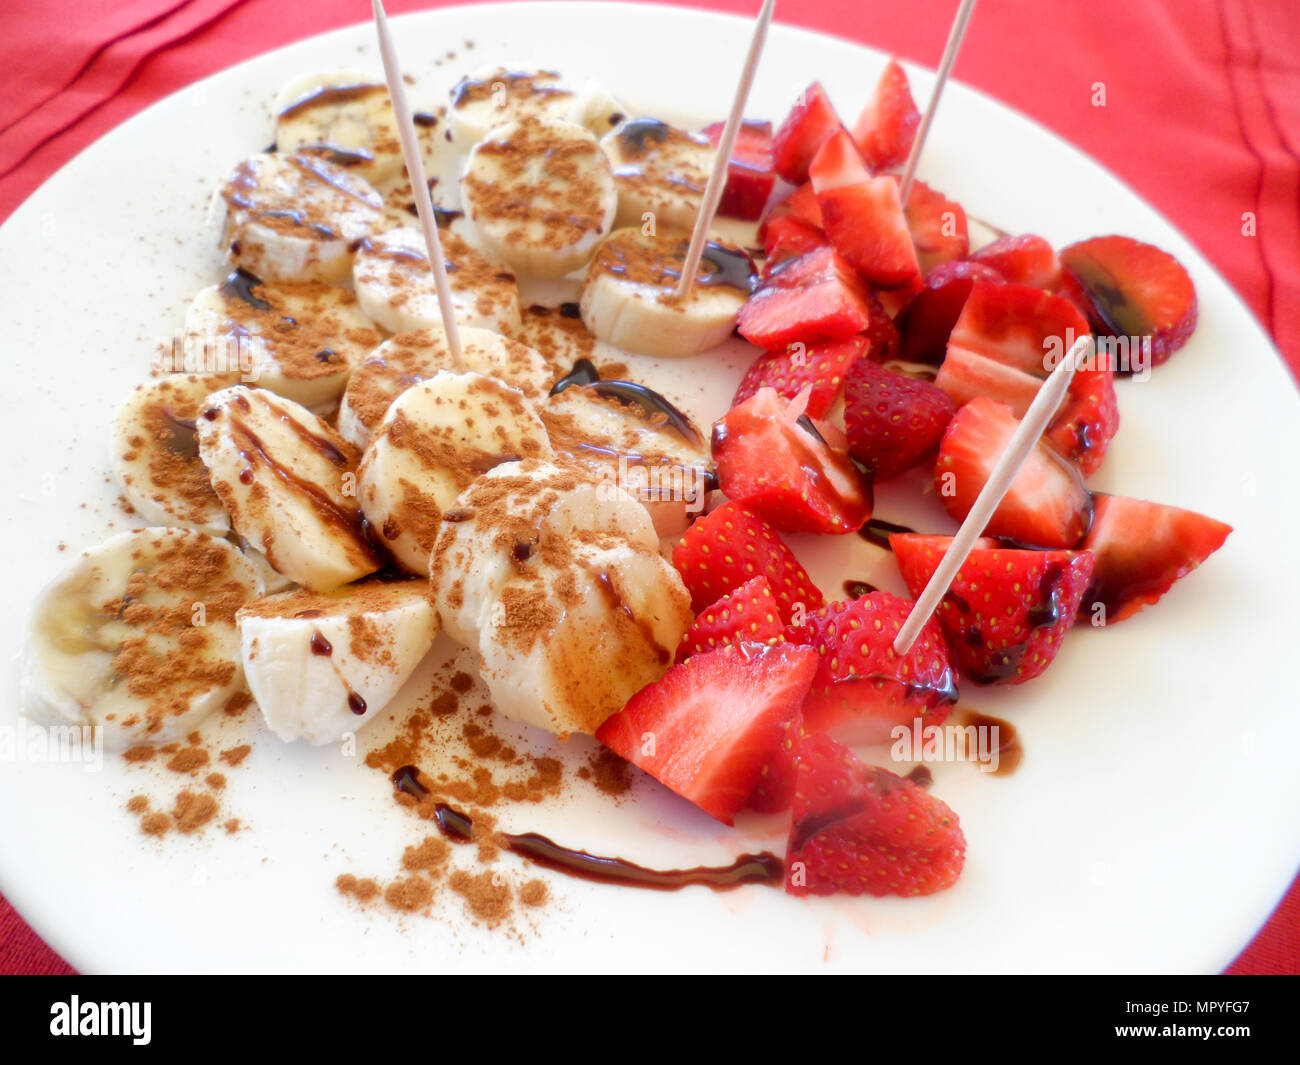 An after dinner dessert of Sliced Banana and Strawberry with a Demerara sugar and balsamic glaze, served in a Greek restaurant in Rhodes Old Town Stock Photo